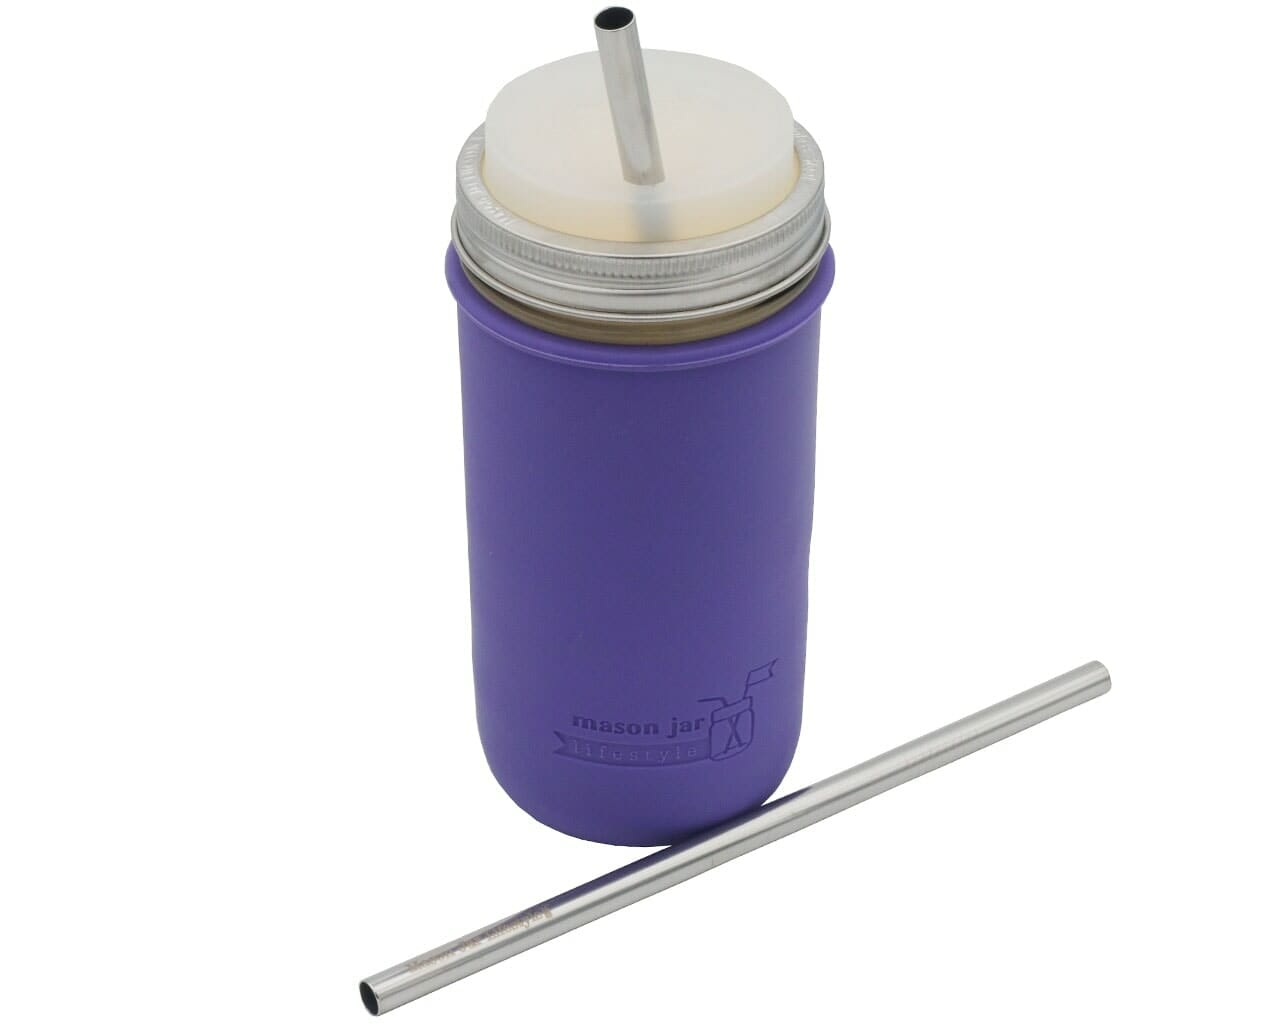  4 SUPER WIDE Boba Stainless Steel 9.5 Long x 1/2 Wide Drink  Straw Smoothie Thick Milkshake -CocoStraw Brand : Home & Kitchen